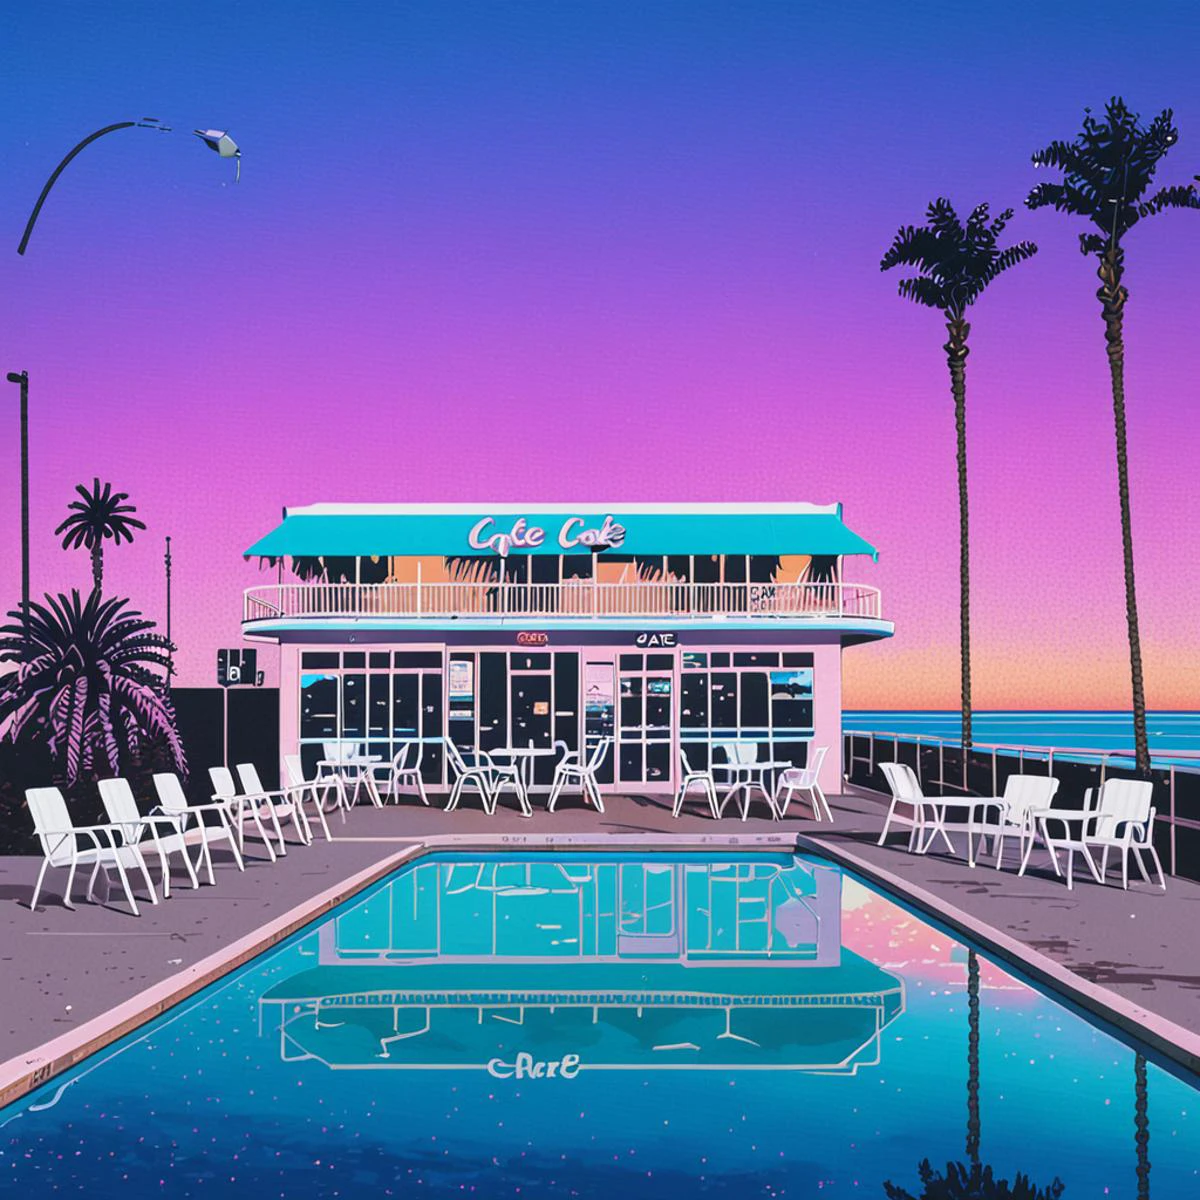 Lifted view of A Vintage 80's Cafe with pool surrounded by beach and Palm Trees at sunset, gradient sky, water reflection, road, chairs, building, 